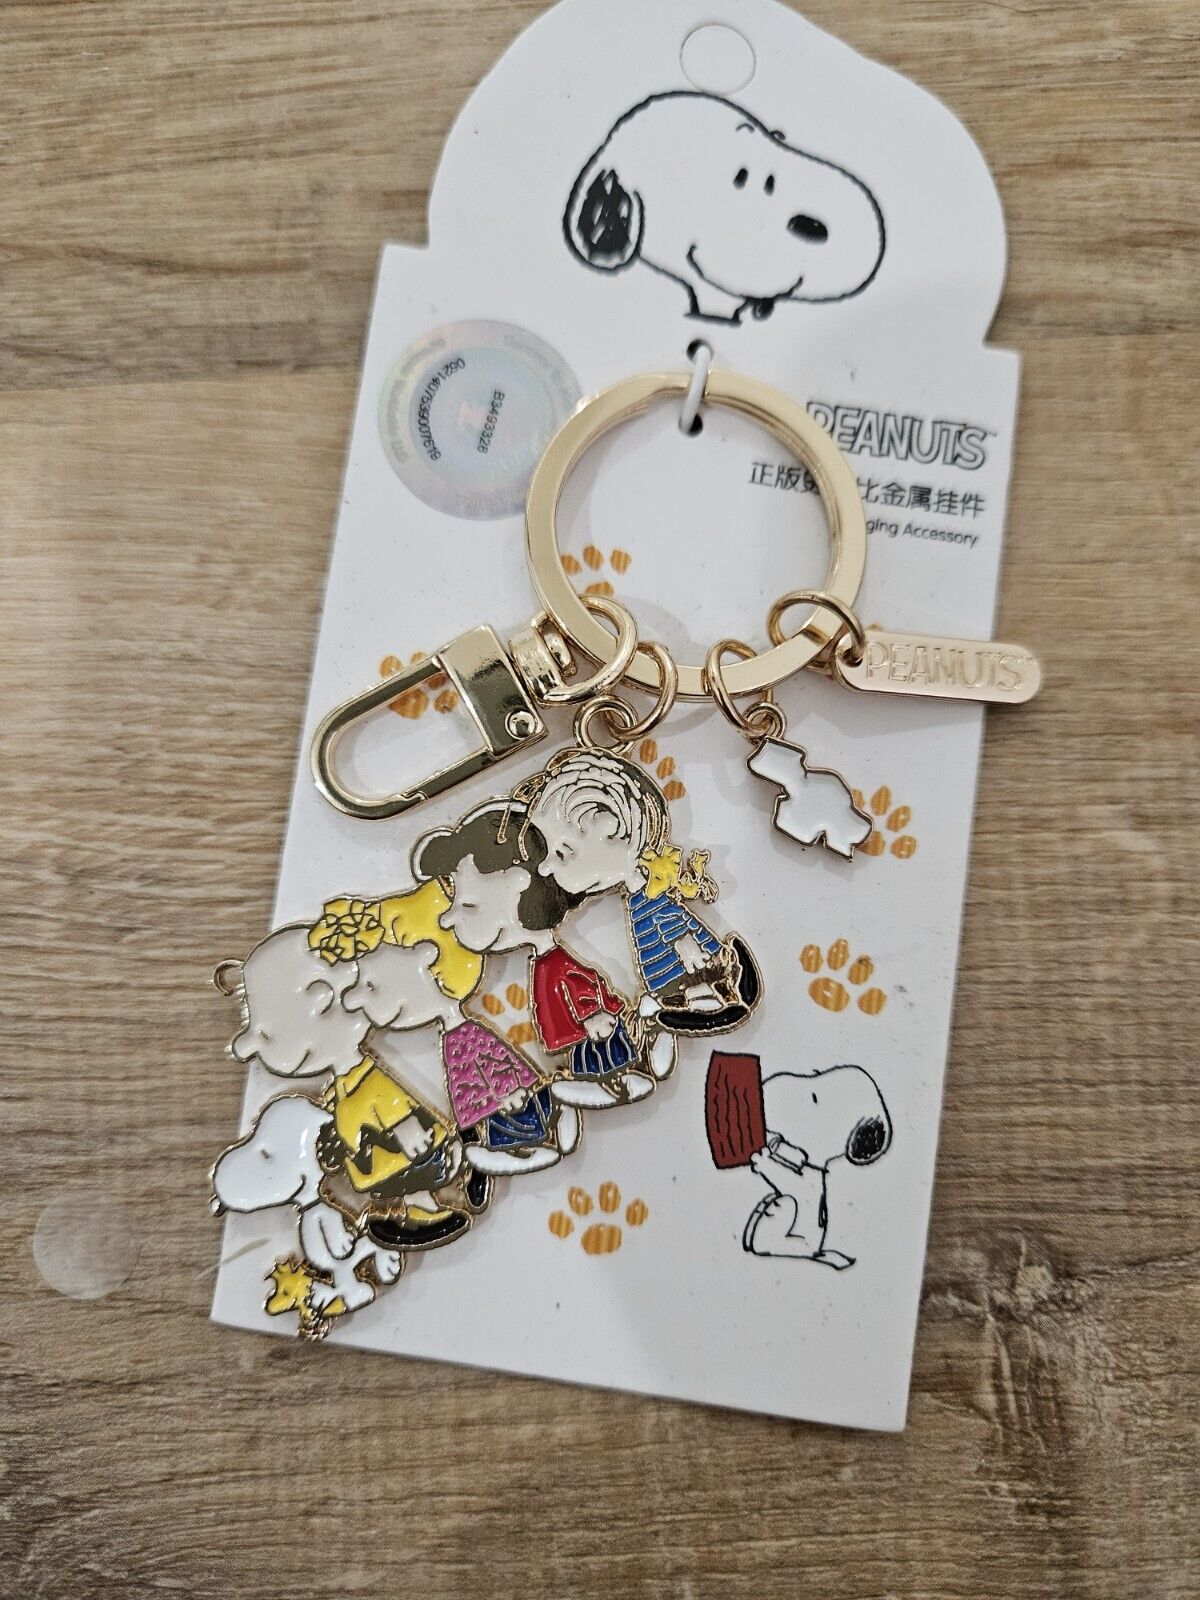 Peanuts Snoopy Family 70th Anniversary Collectible Metal Keychain Keyring